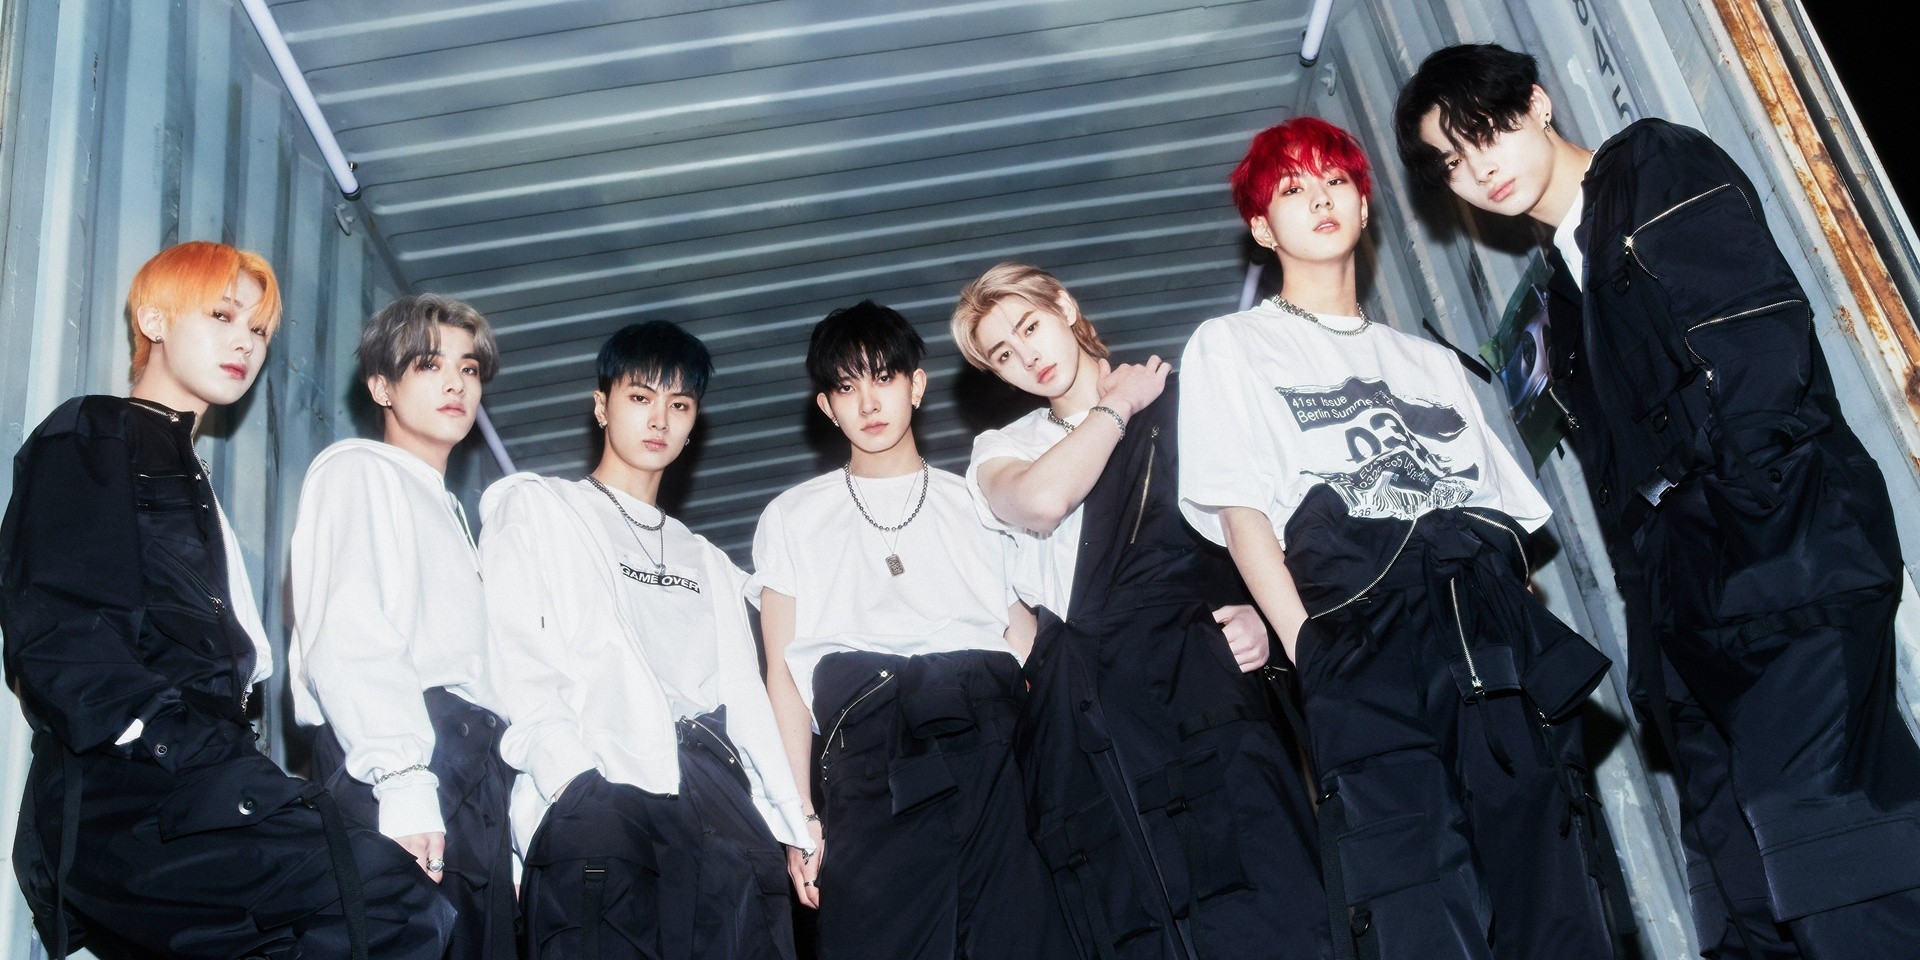 ENHYPEN announce 'MANIFESTO' world tour, confirm concerts in Seoul, Osaka, New York, and more